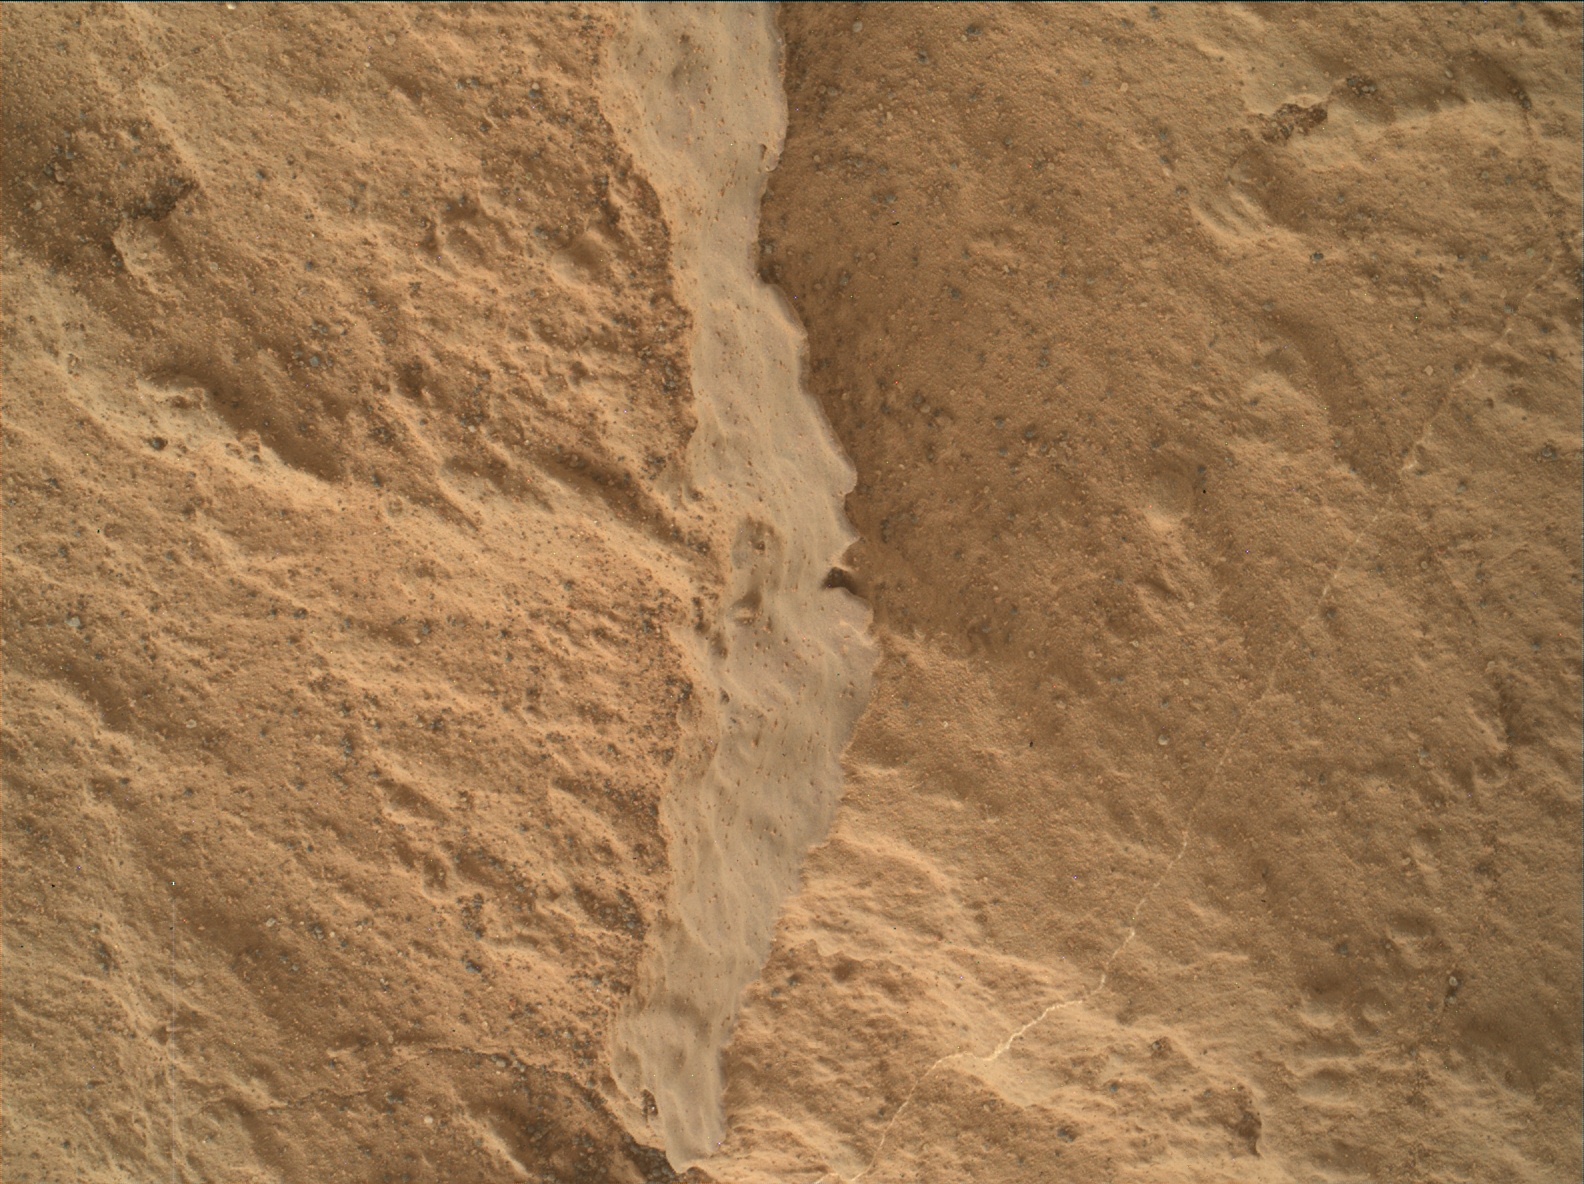 Nasa's Mars rover Curiosity acquired this image using its Mars Hand Lens Imager (MAHLI) on Sol 3188